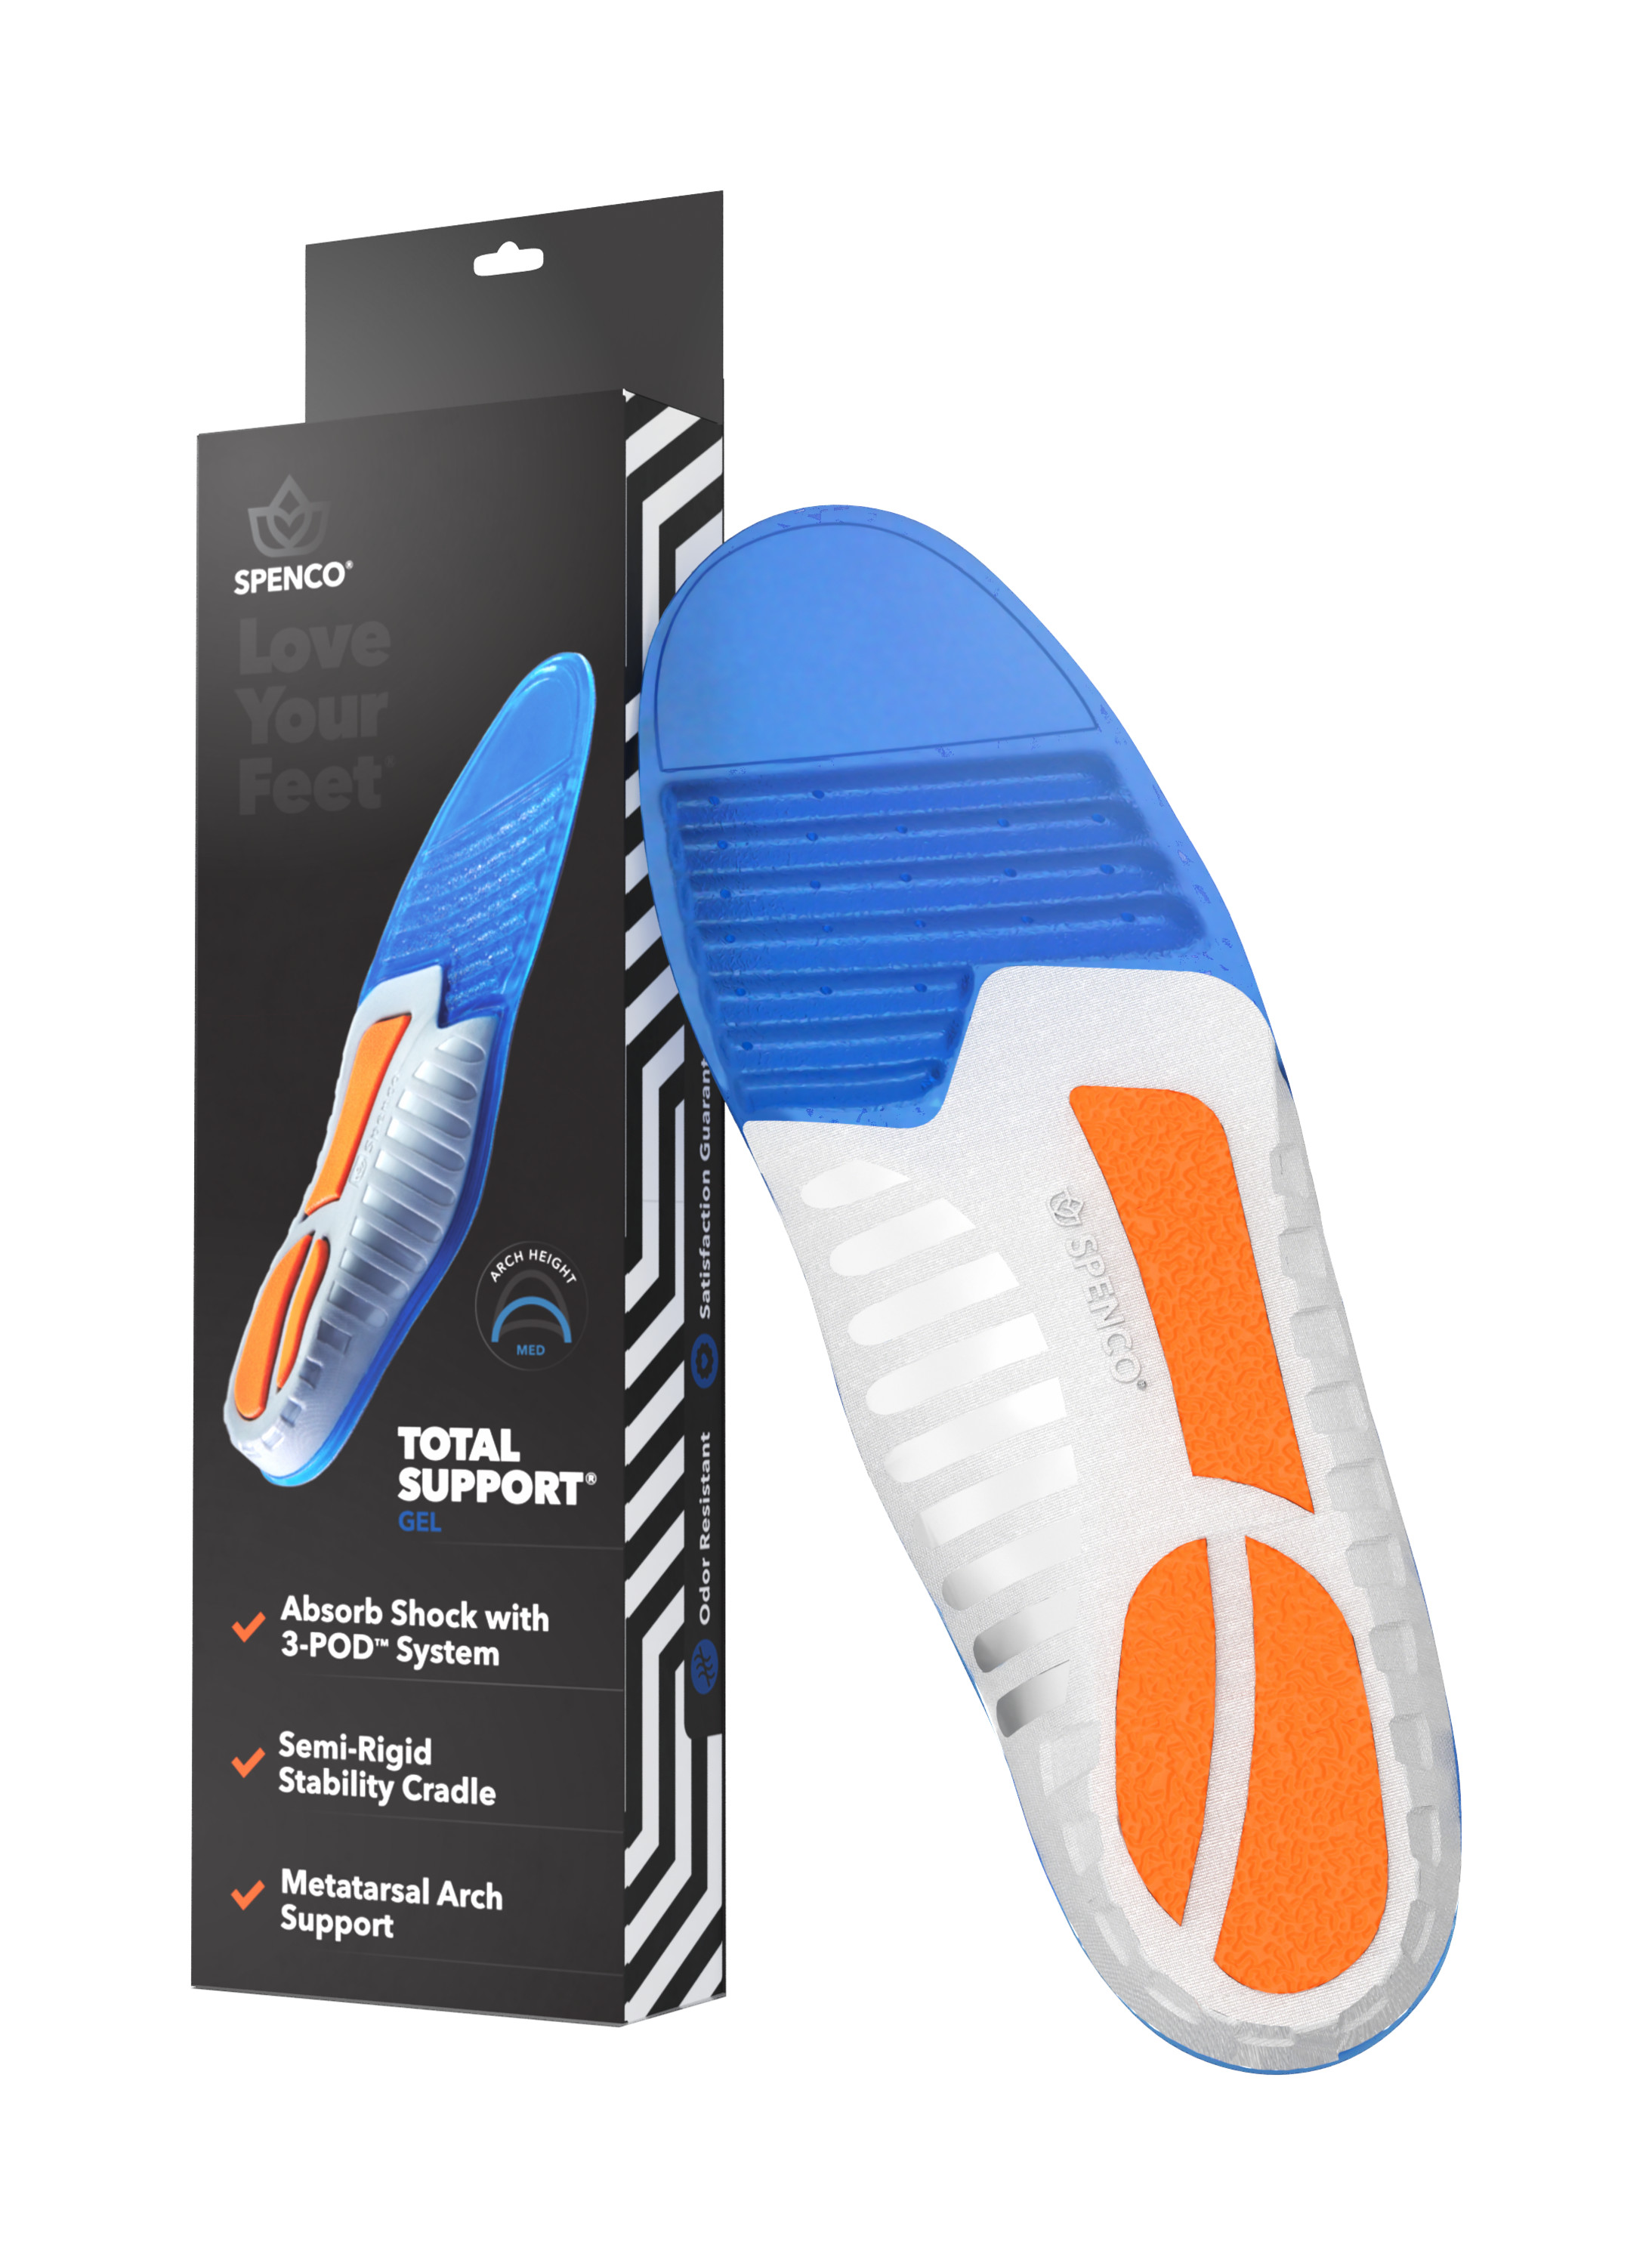 Spenco Total Support Gel Insole - image 1 of 5